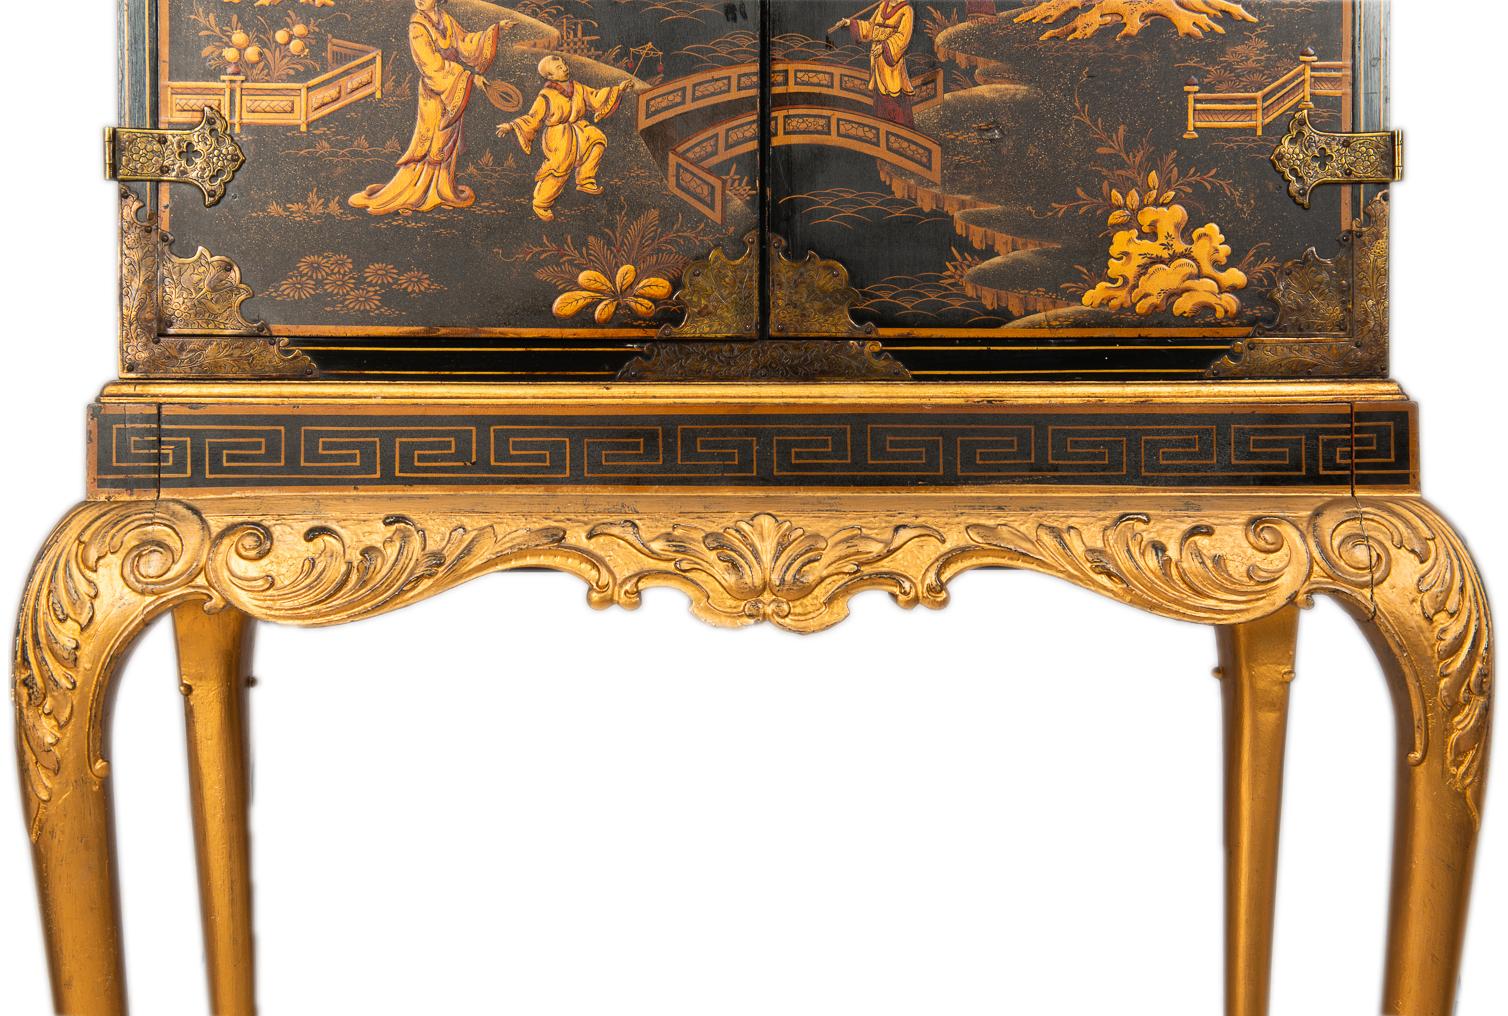 20th Century Queen Ann Style Lacquered Cabinet on Stand, circa 1900